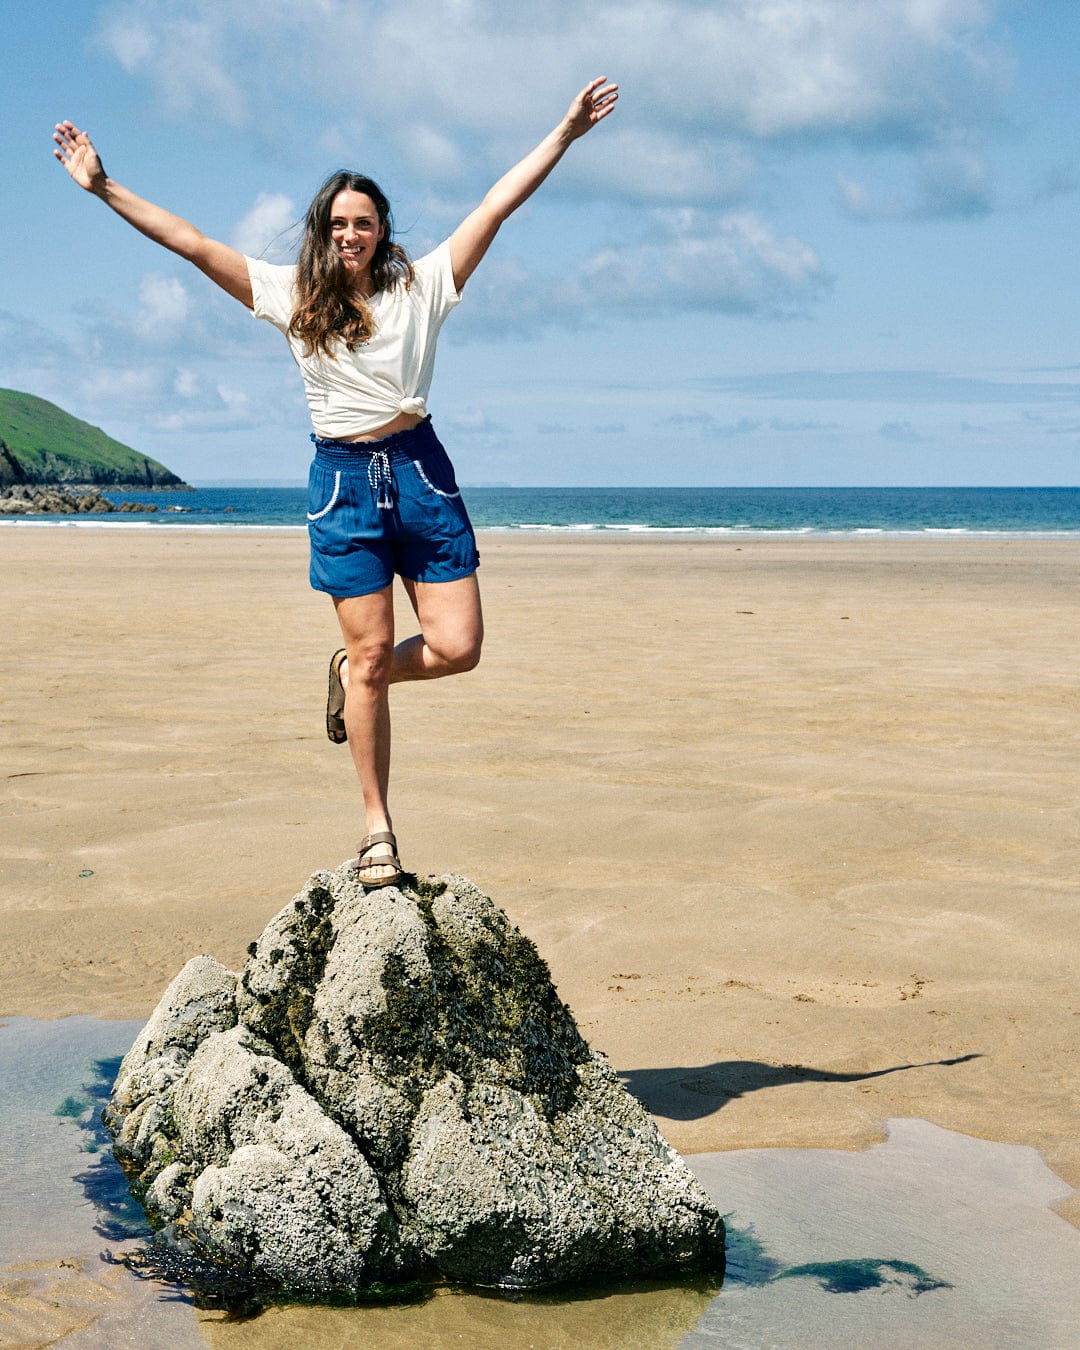 A woman stands on one leg atop a rock on a sandy beach with the ocean and a green hill in the background. She has her arms raised, smiles at the camera, and wears Saltrock's Jonie - Womens Shorts - Blue.